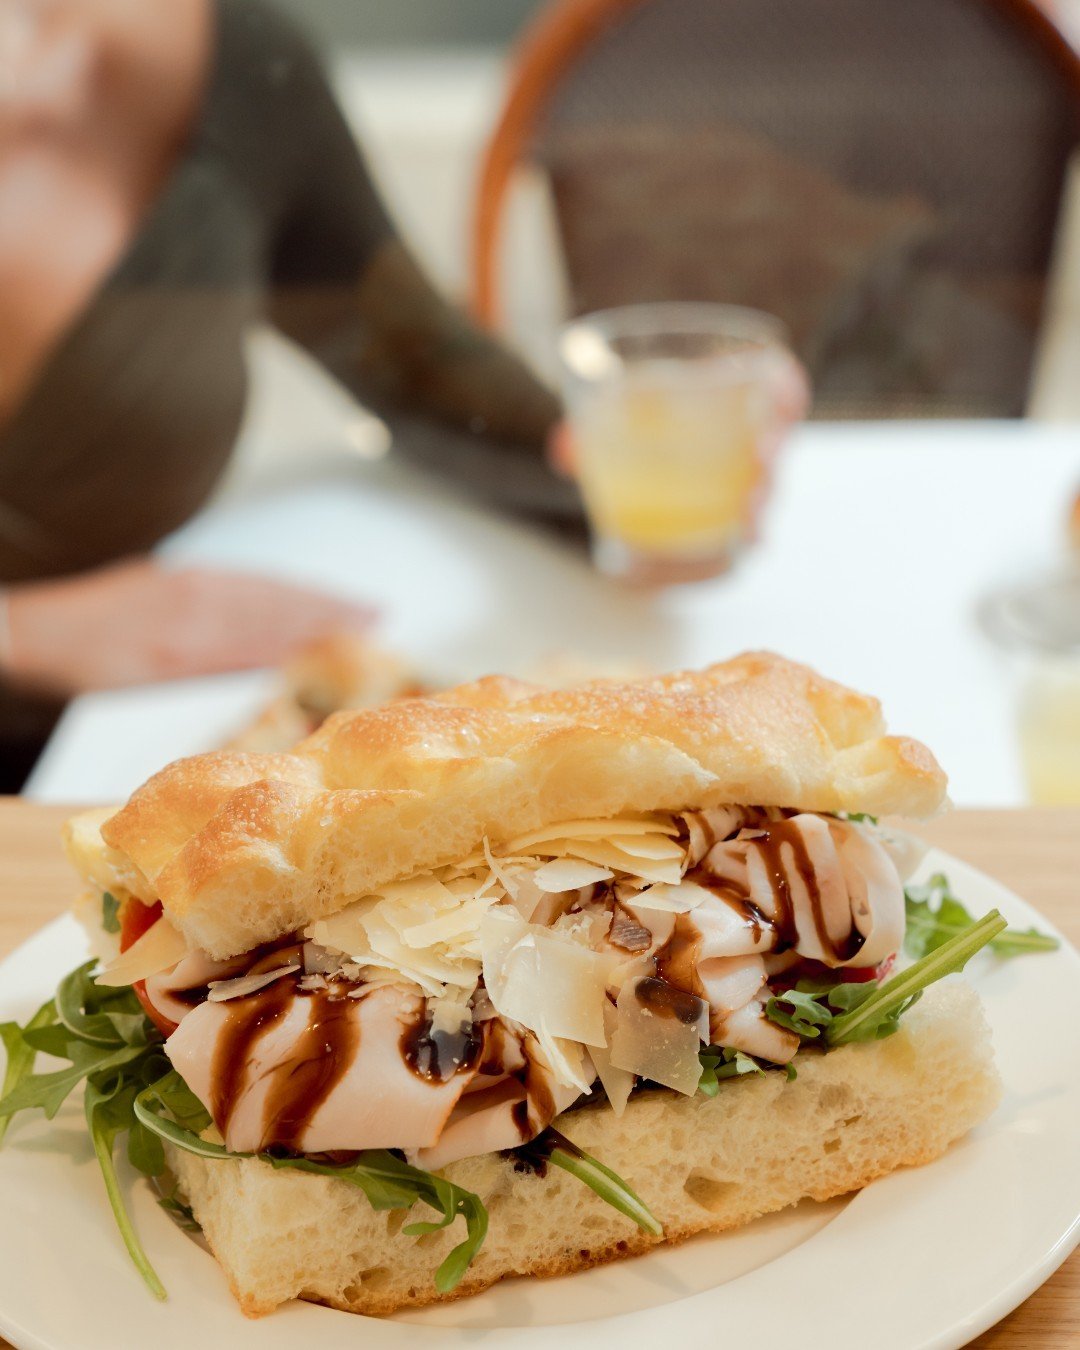 Join us for LUNCH ❤️ what's your favorite Focaccia Sandwich at Bont&agrave; Bakery?